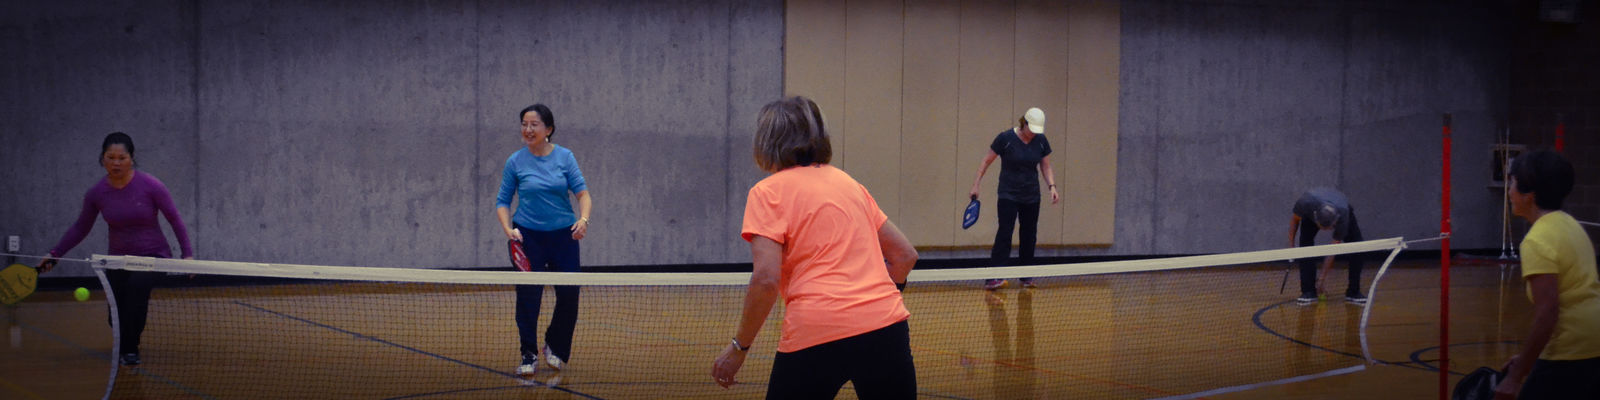 image of 6 people playing indoor pickleball